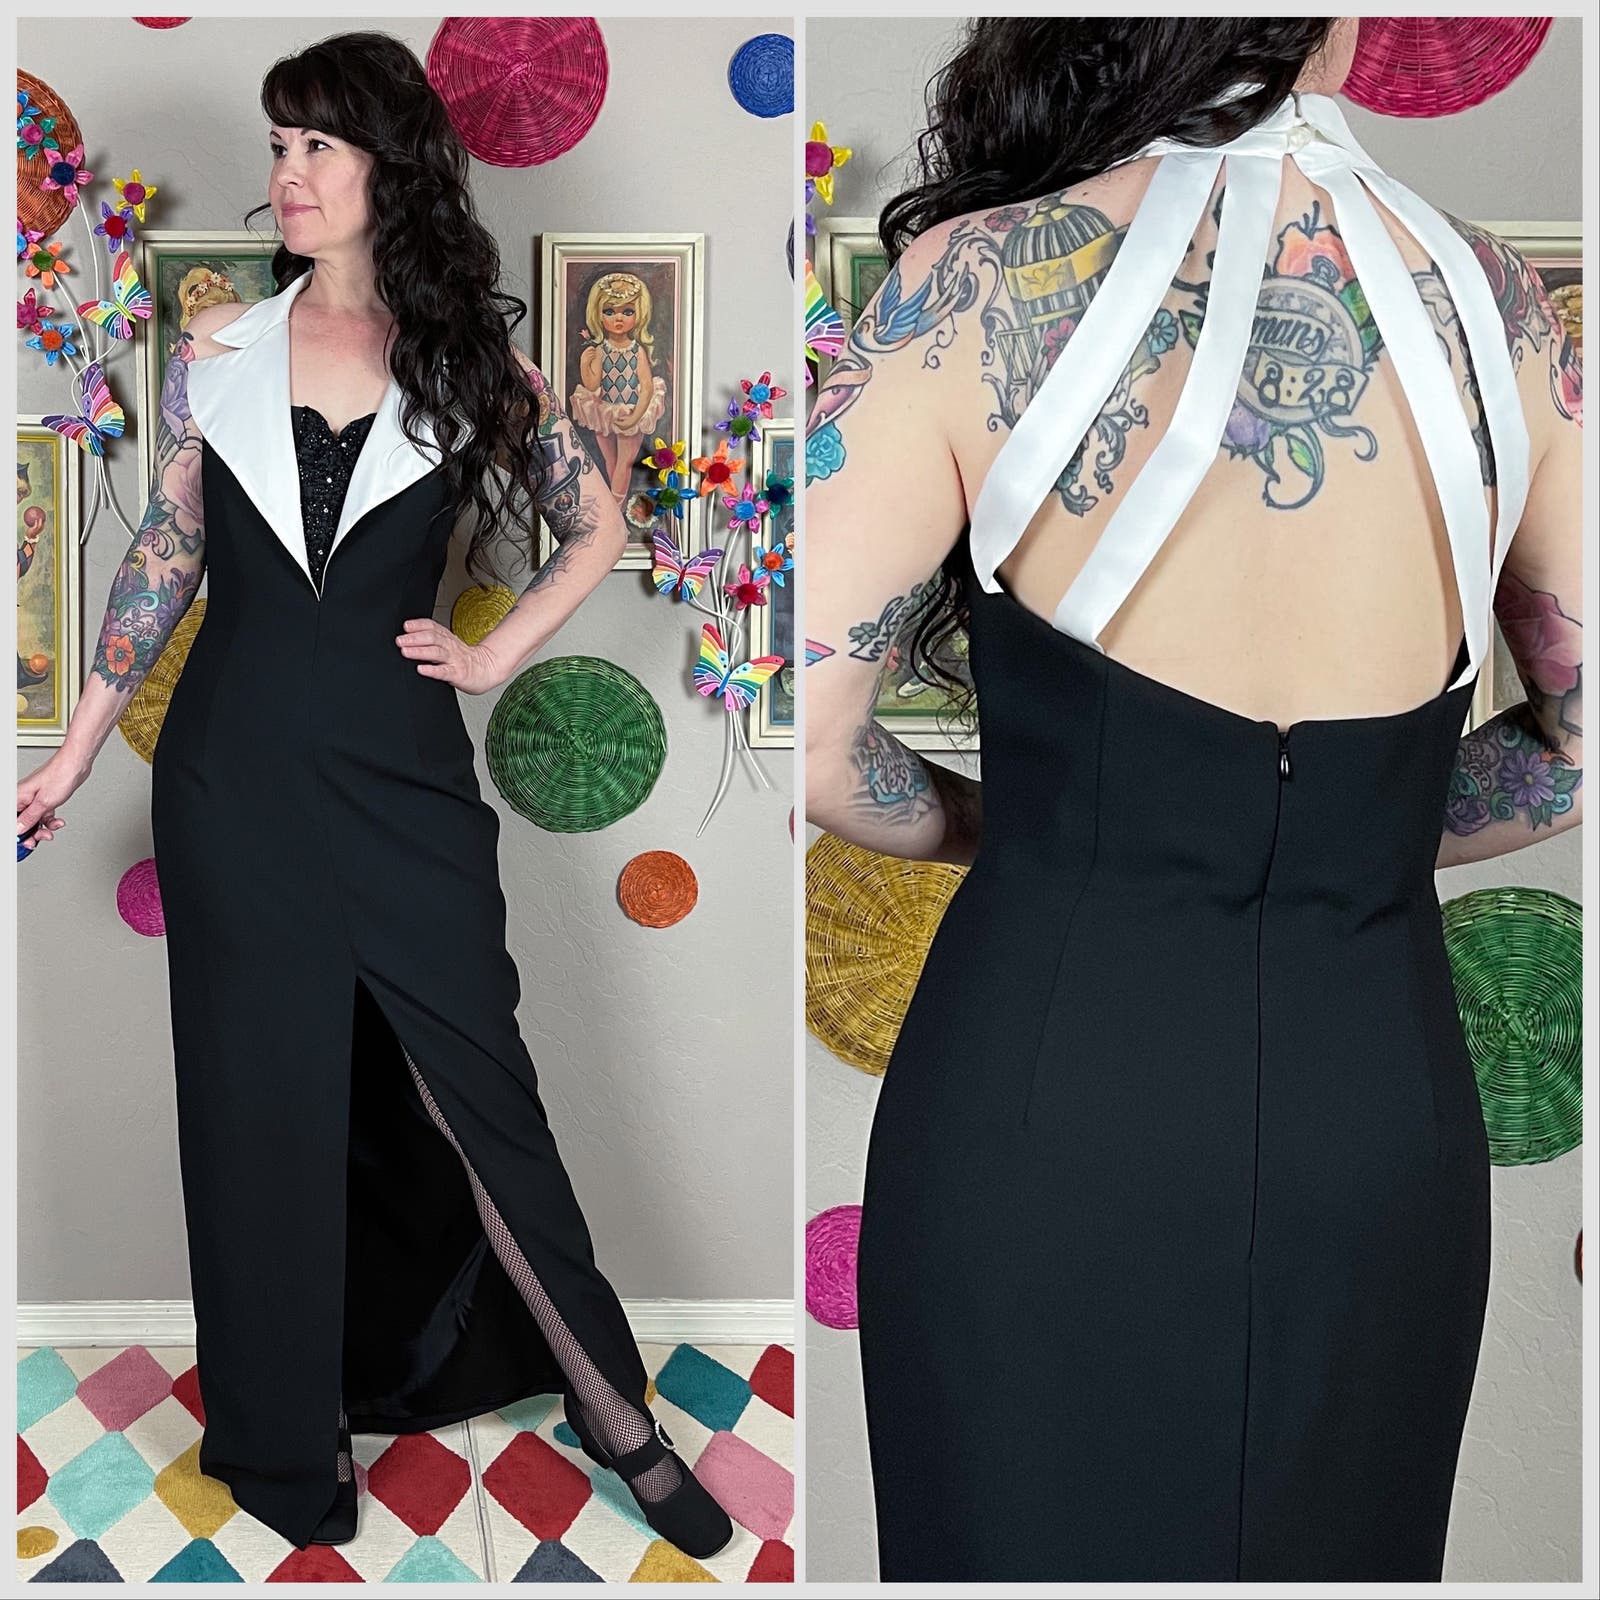 Vintage Vintage 1990s Black and White Sleeveless Tuxedo Gown Size M / US 6-8 / IT 42-44 - 1 Preview